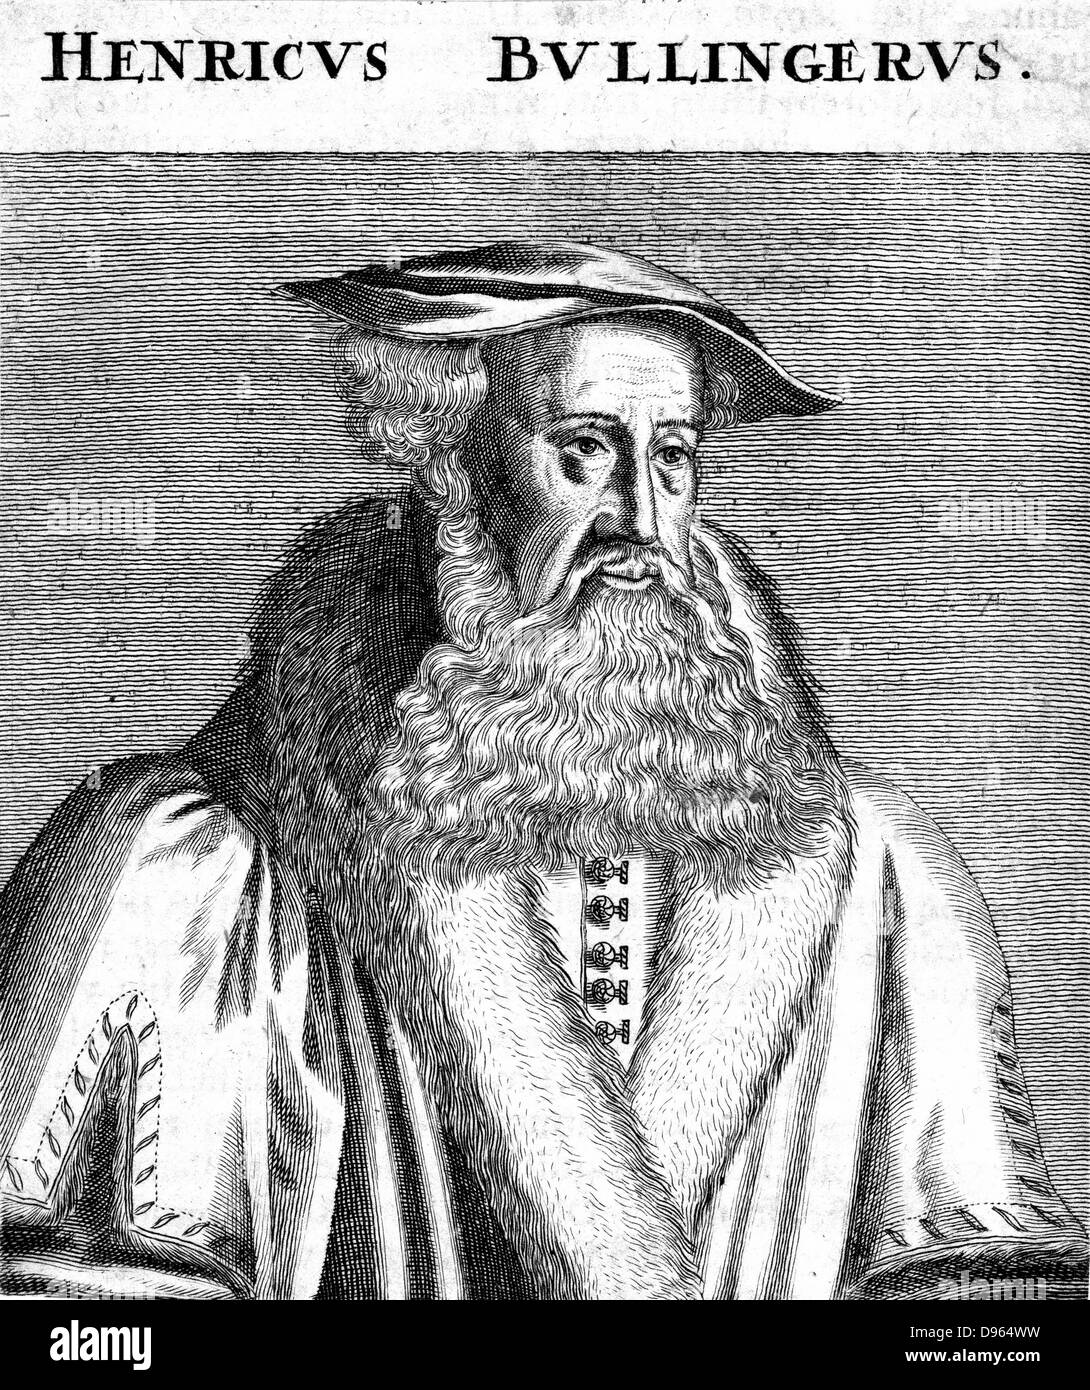 Heinrich Bullinger (1504-1575) Swiss Protestant Reformation divine. Successor to Zwingli. Copperplate engraving. Stock Photo